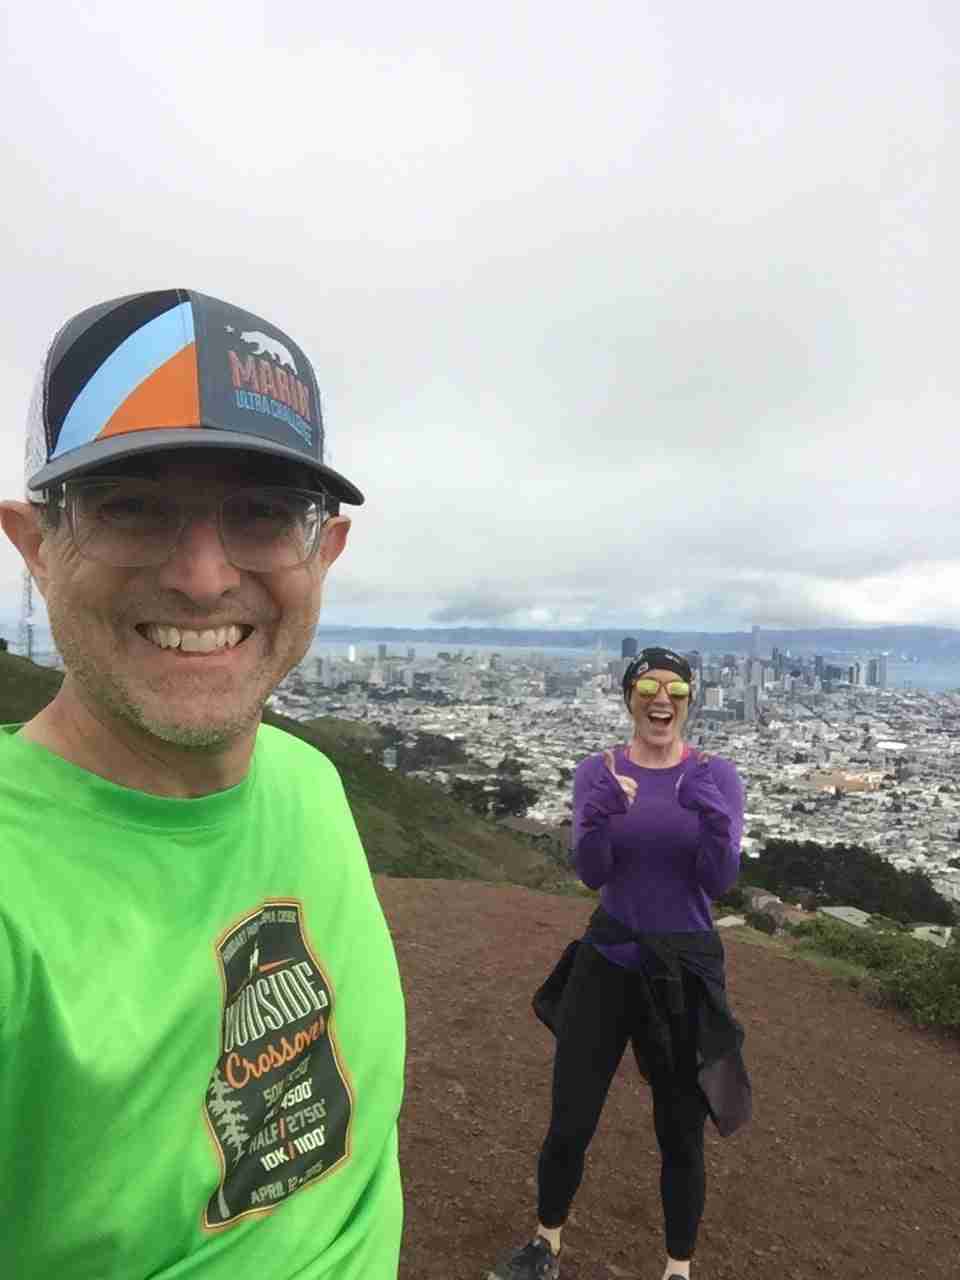 Tantek and Courtney smiling, more than six feet apart from each other, on top of the North Peak of Twin Peaks, with downtown San Francisco in the distance behind them.